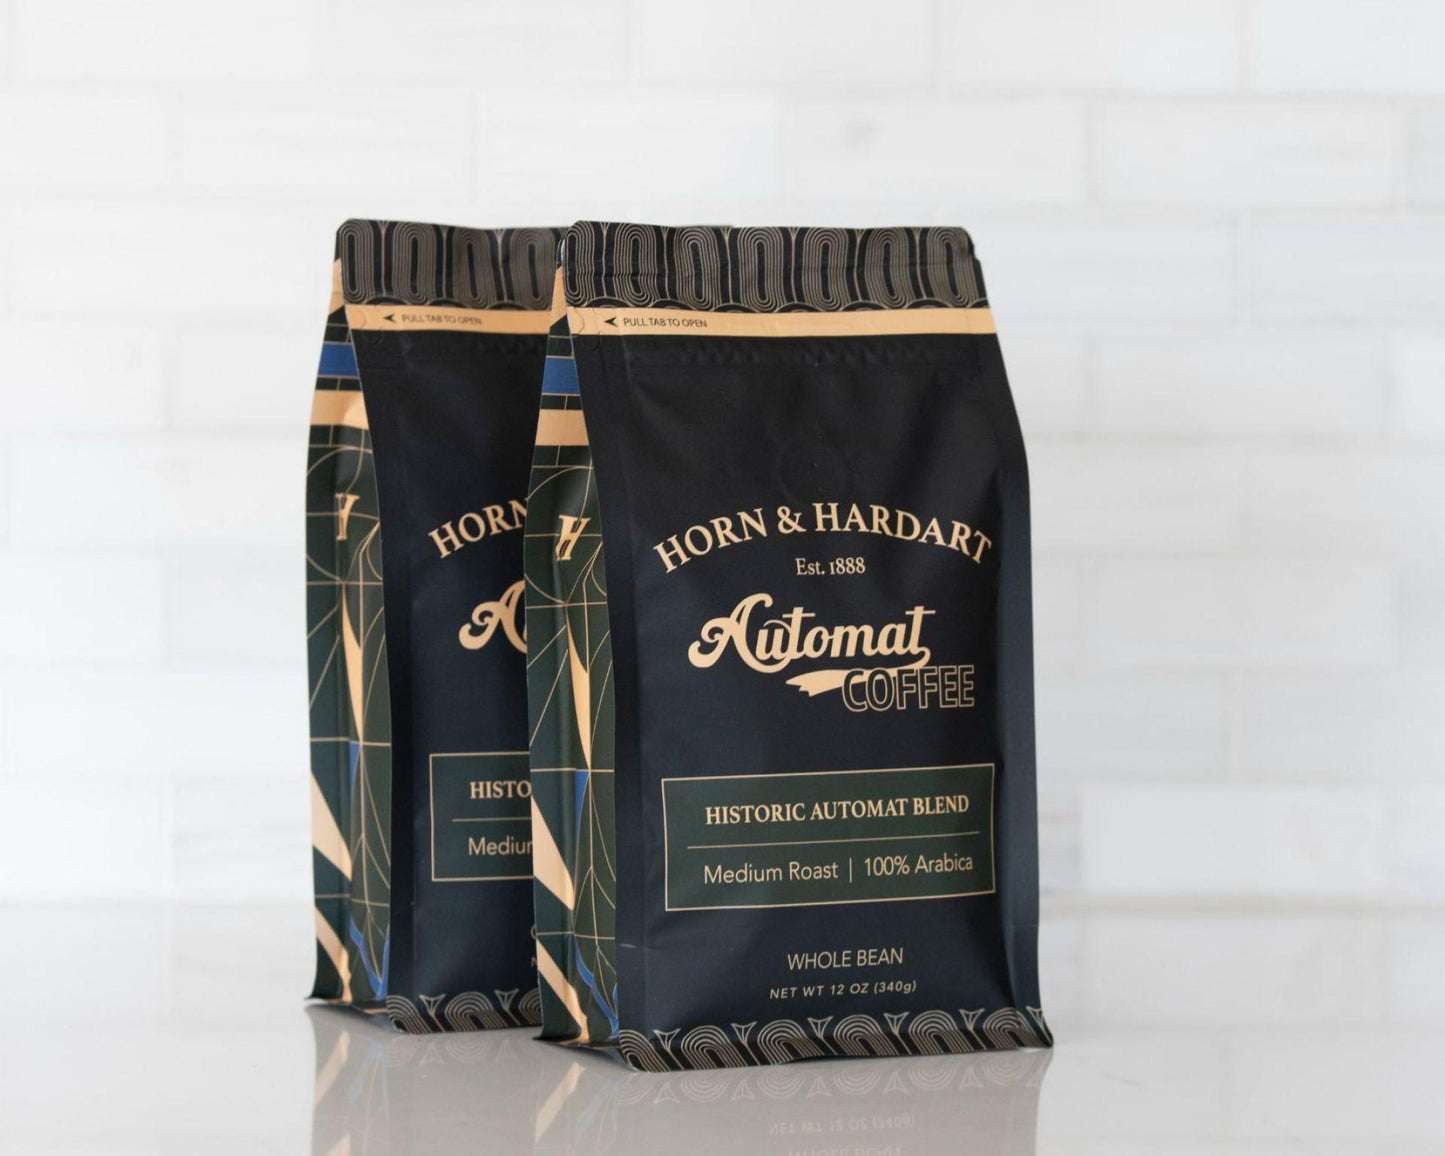 Horn and Hardart Coffee - Historic Automat Blend - Whole Bean